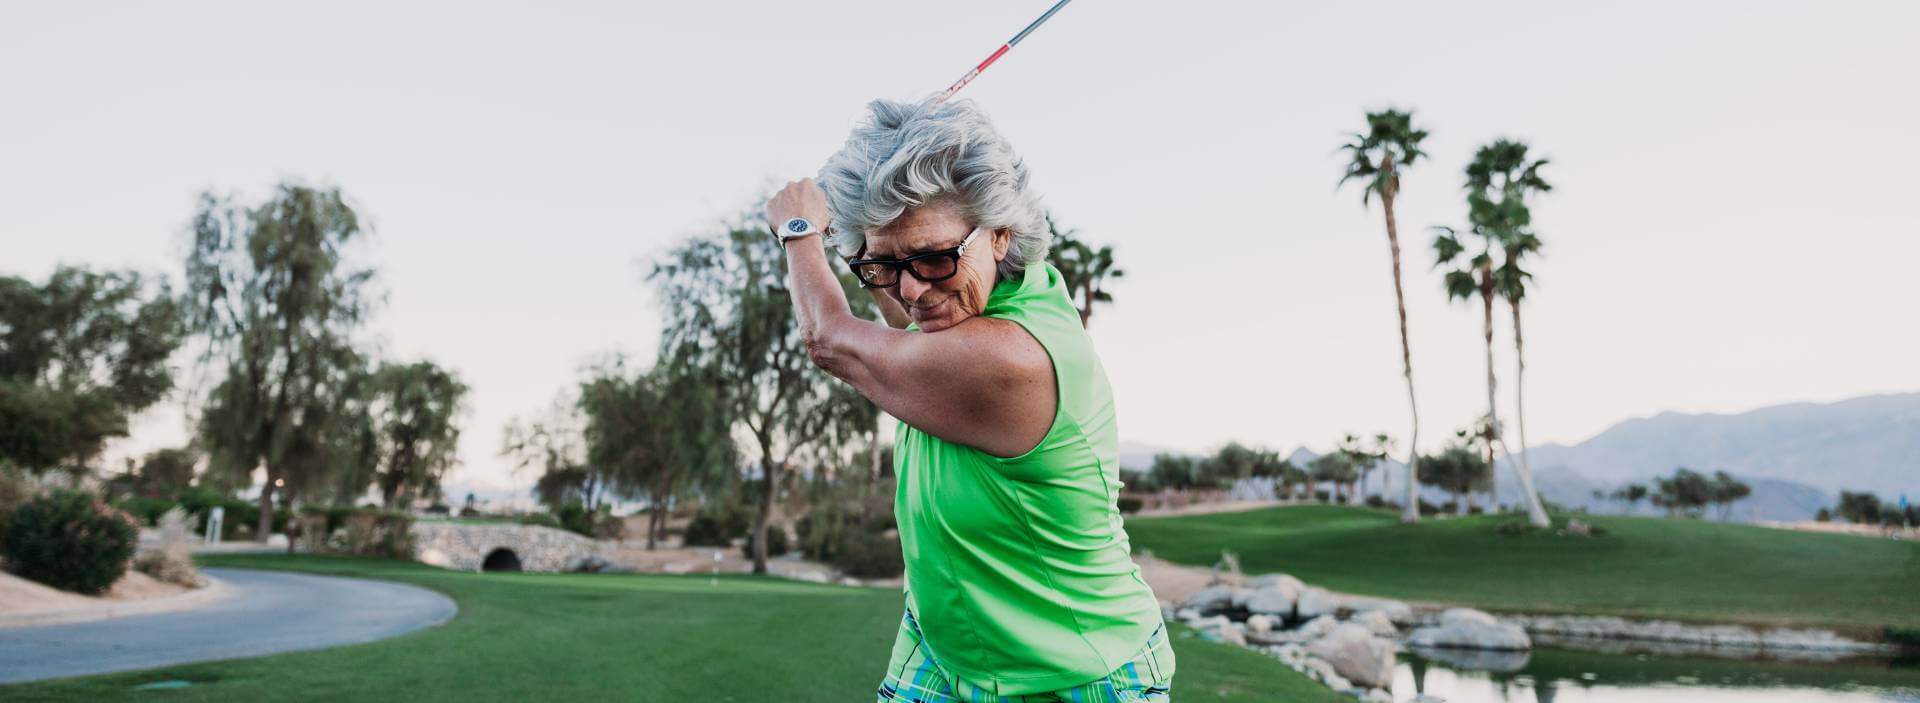 Captain Jan Anderson wearing a Green tank top and in a position ready to hit a a gold ball at a gold course with a Abingdon watch on her left wrist